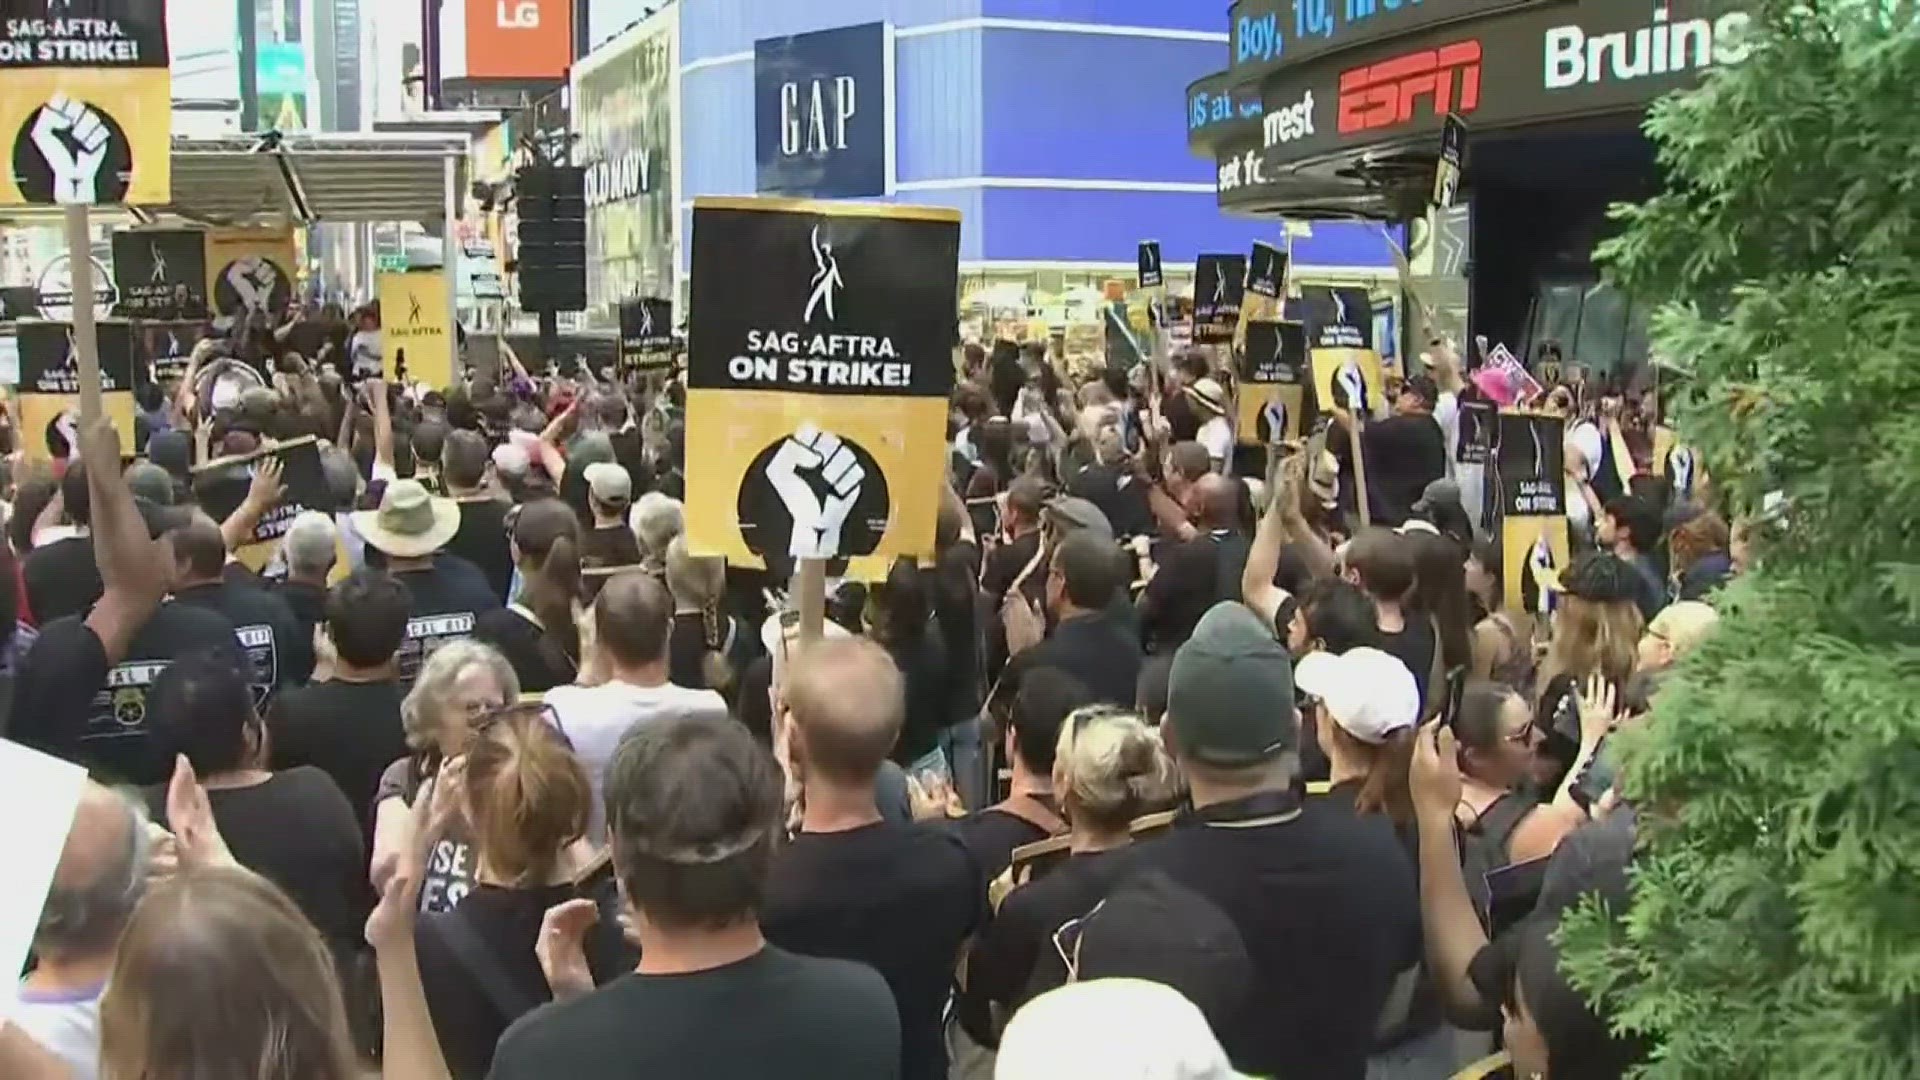 Actors and representatives from the actors union took turns giving fiery speeches on a stage in the heart of Times Square.